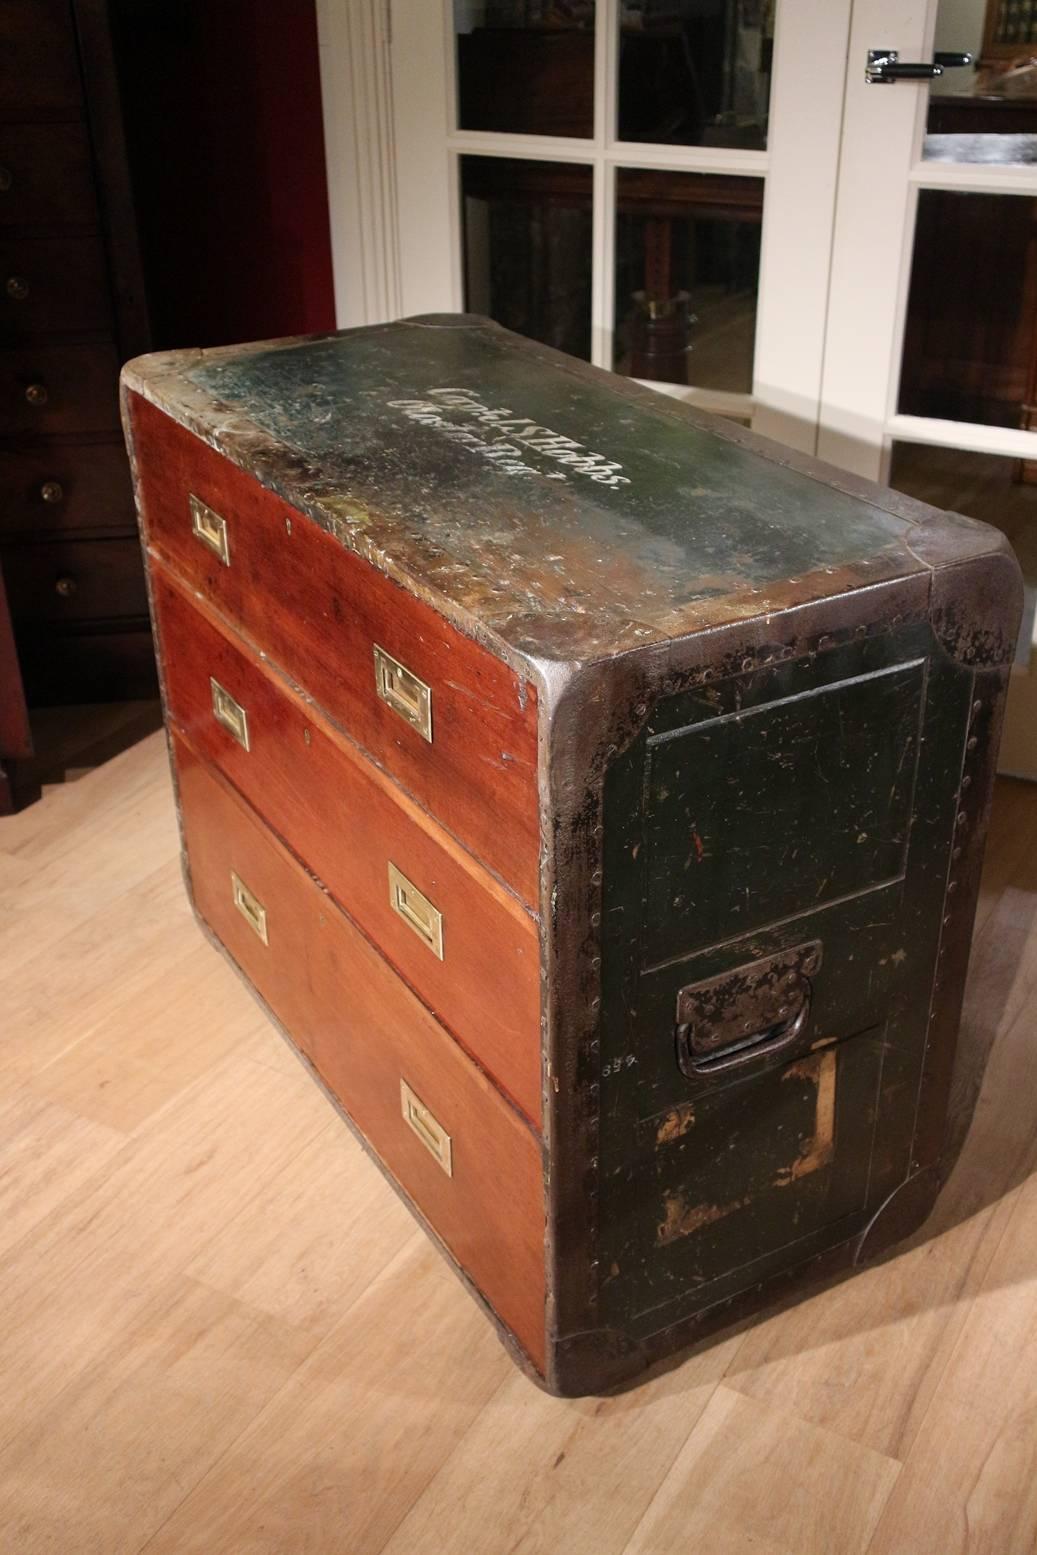 Very special antique campaign chest of drawers from England. The case has a casket externally with metal bands against damage and heavy carrying handles. Originally, such a plate was also on the front. This plate was secured with screws for